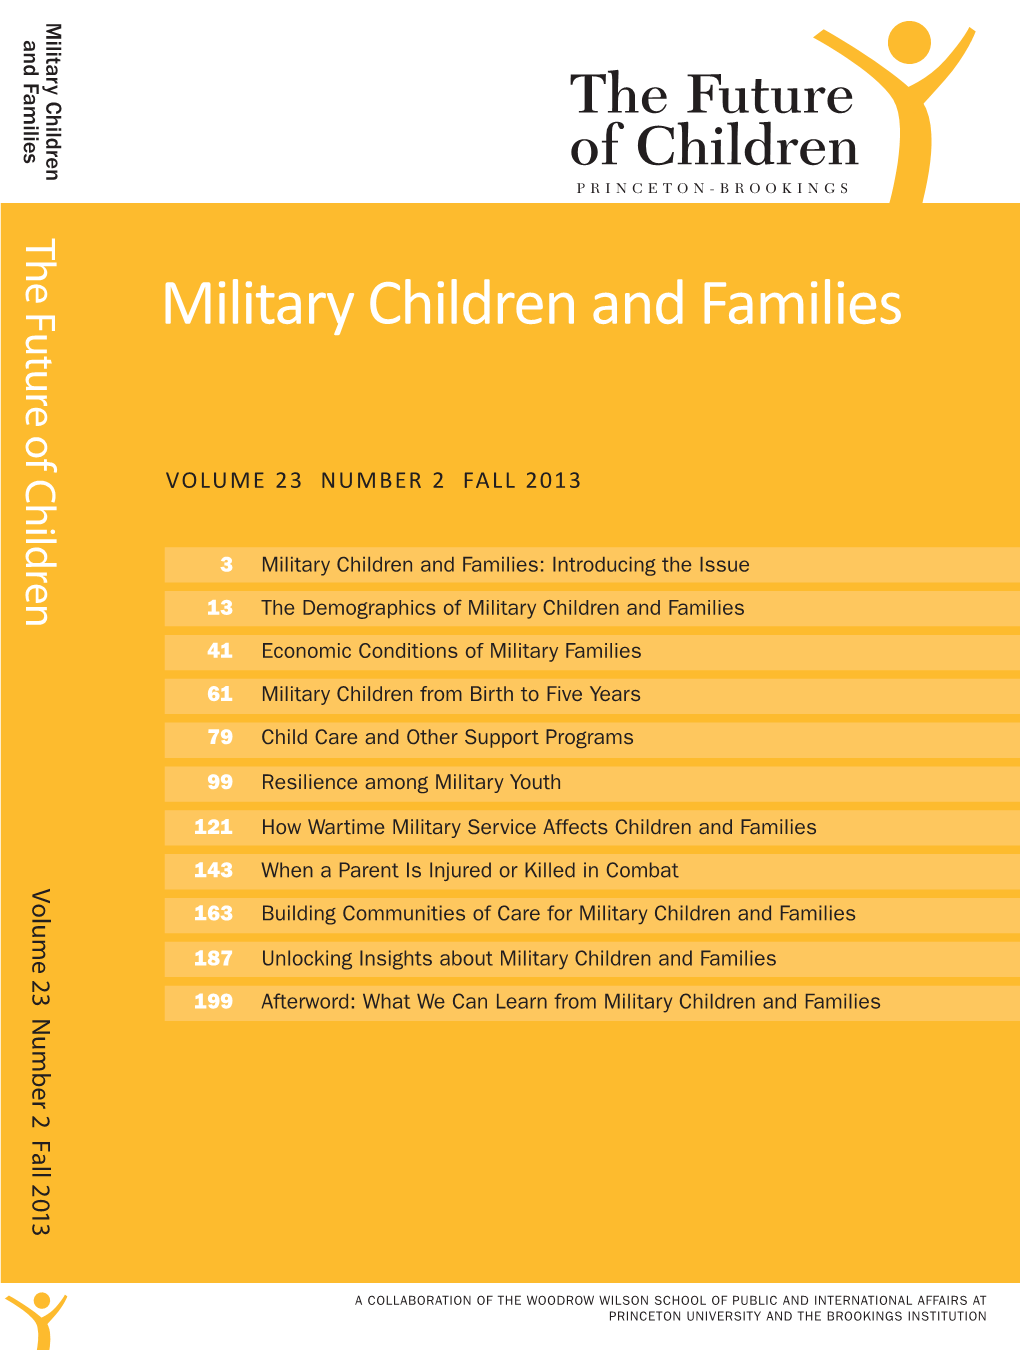 Military Children and Families F C Hil Dr En VOLUME 23 NUMBER 2 FALL 2013